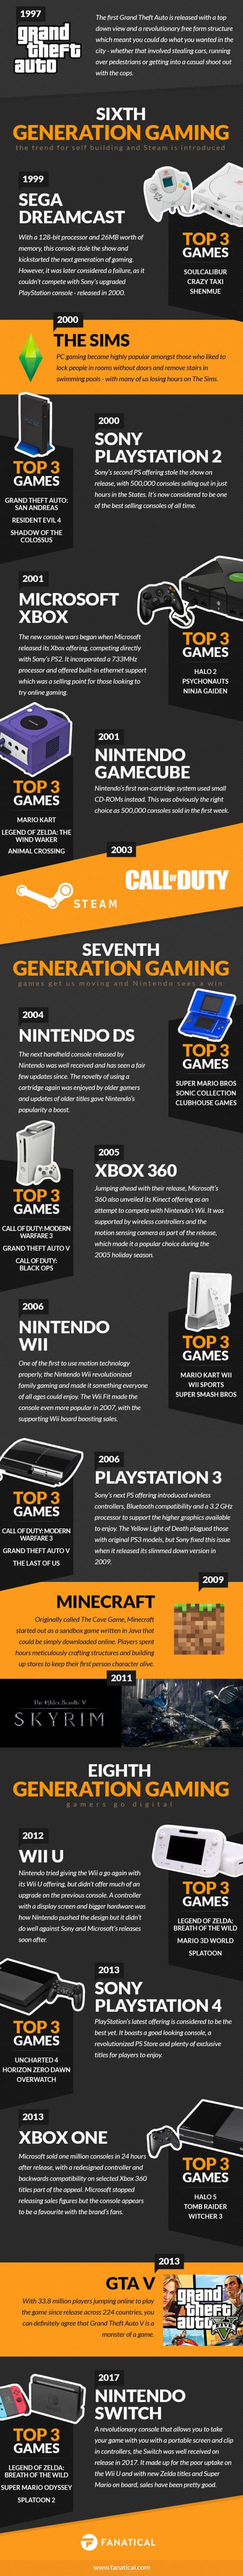 video gaming consoles from 1972 until 2017